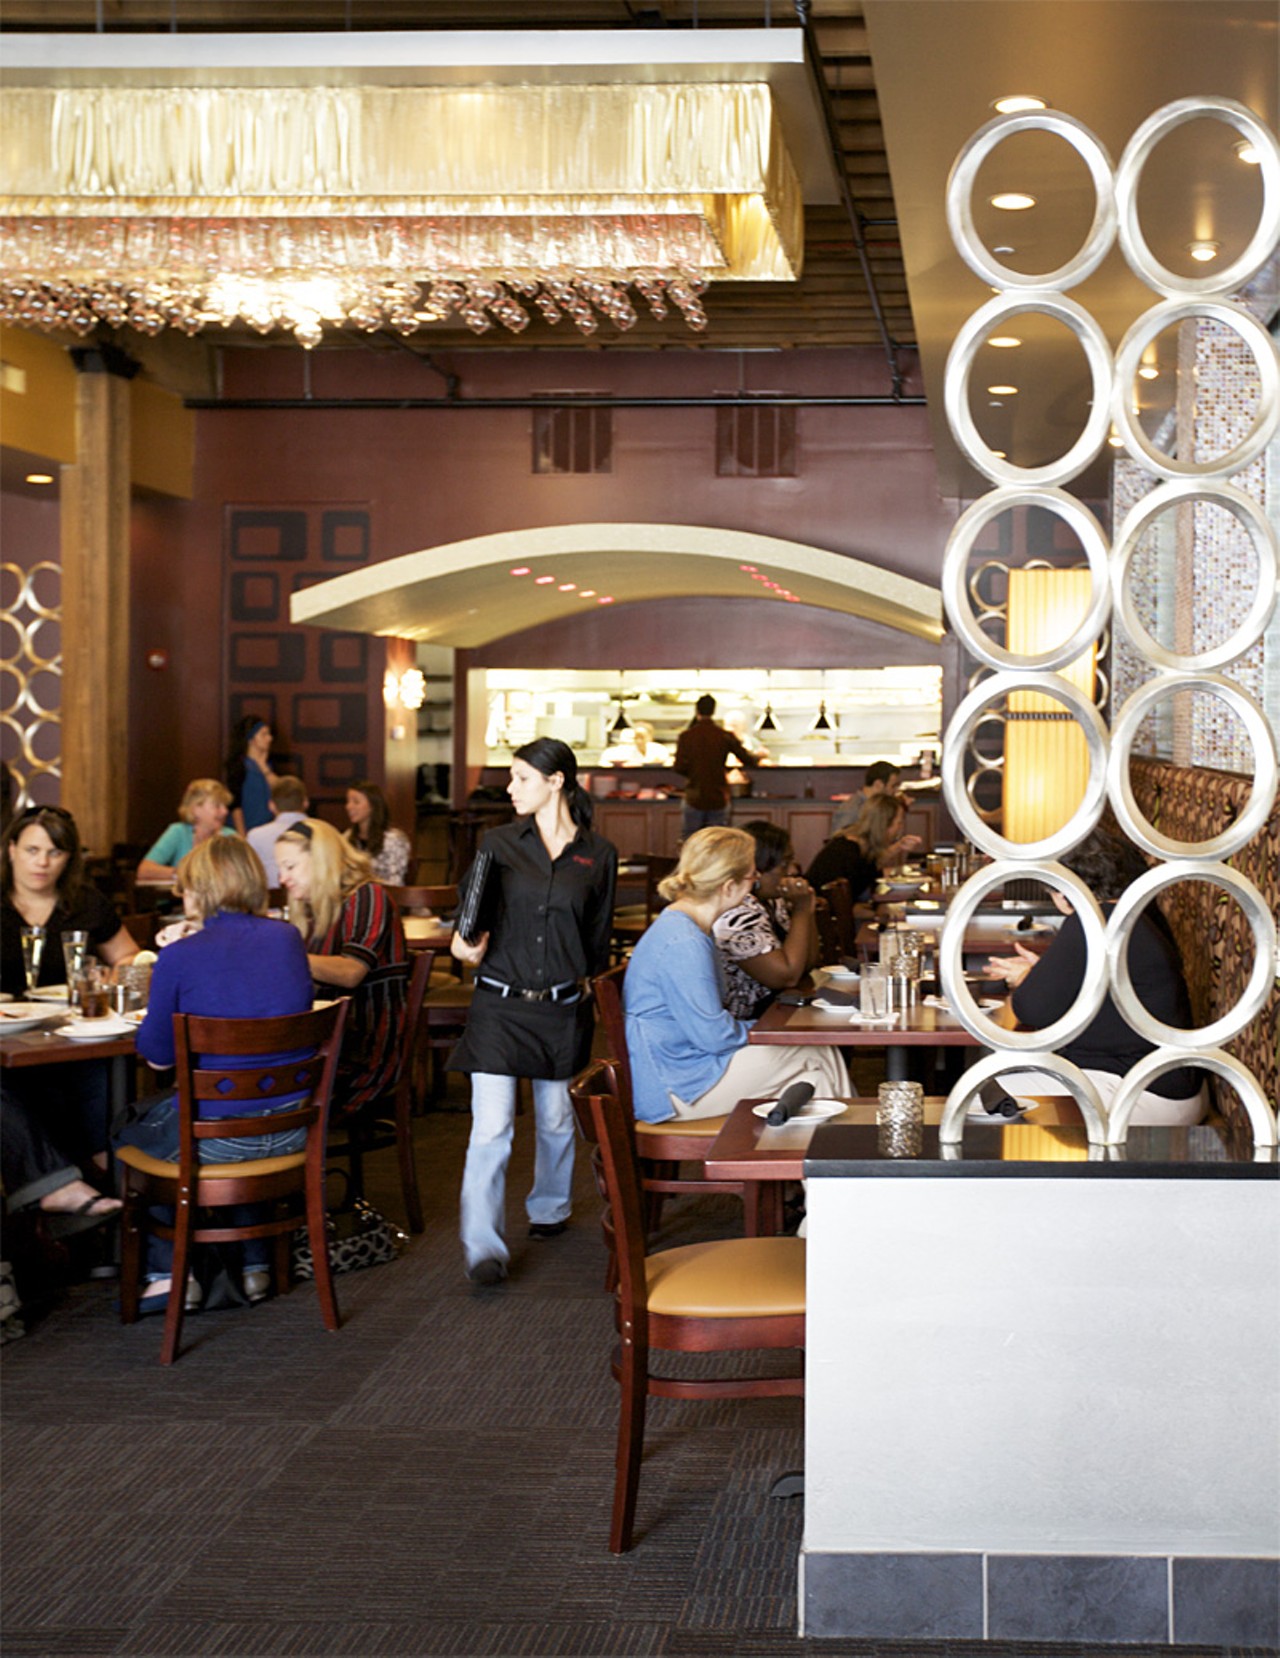 The front dining room at Copia.